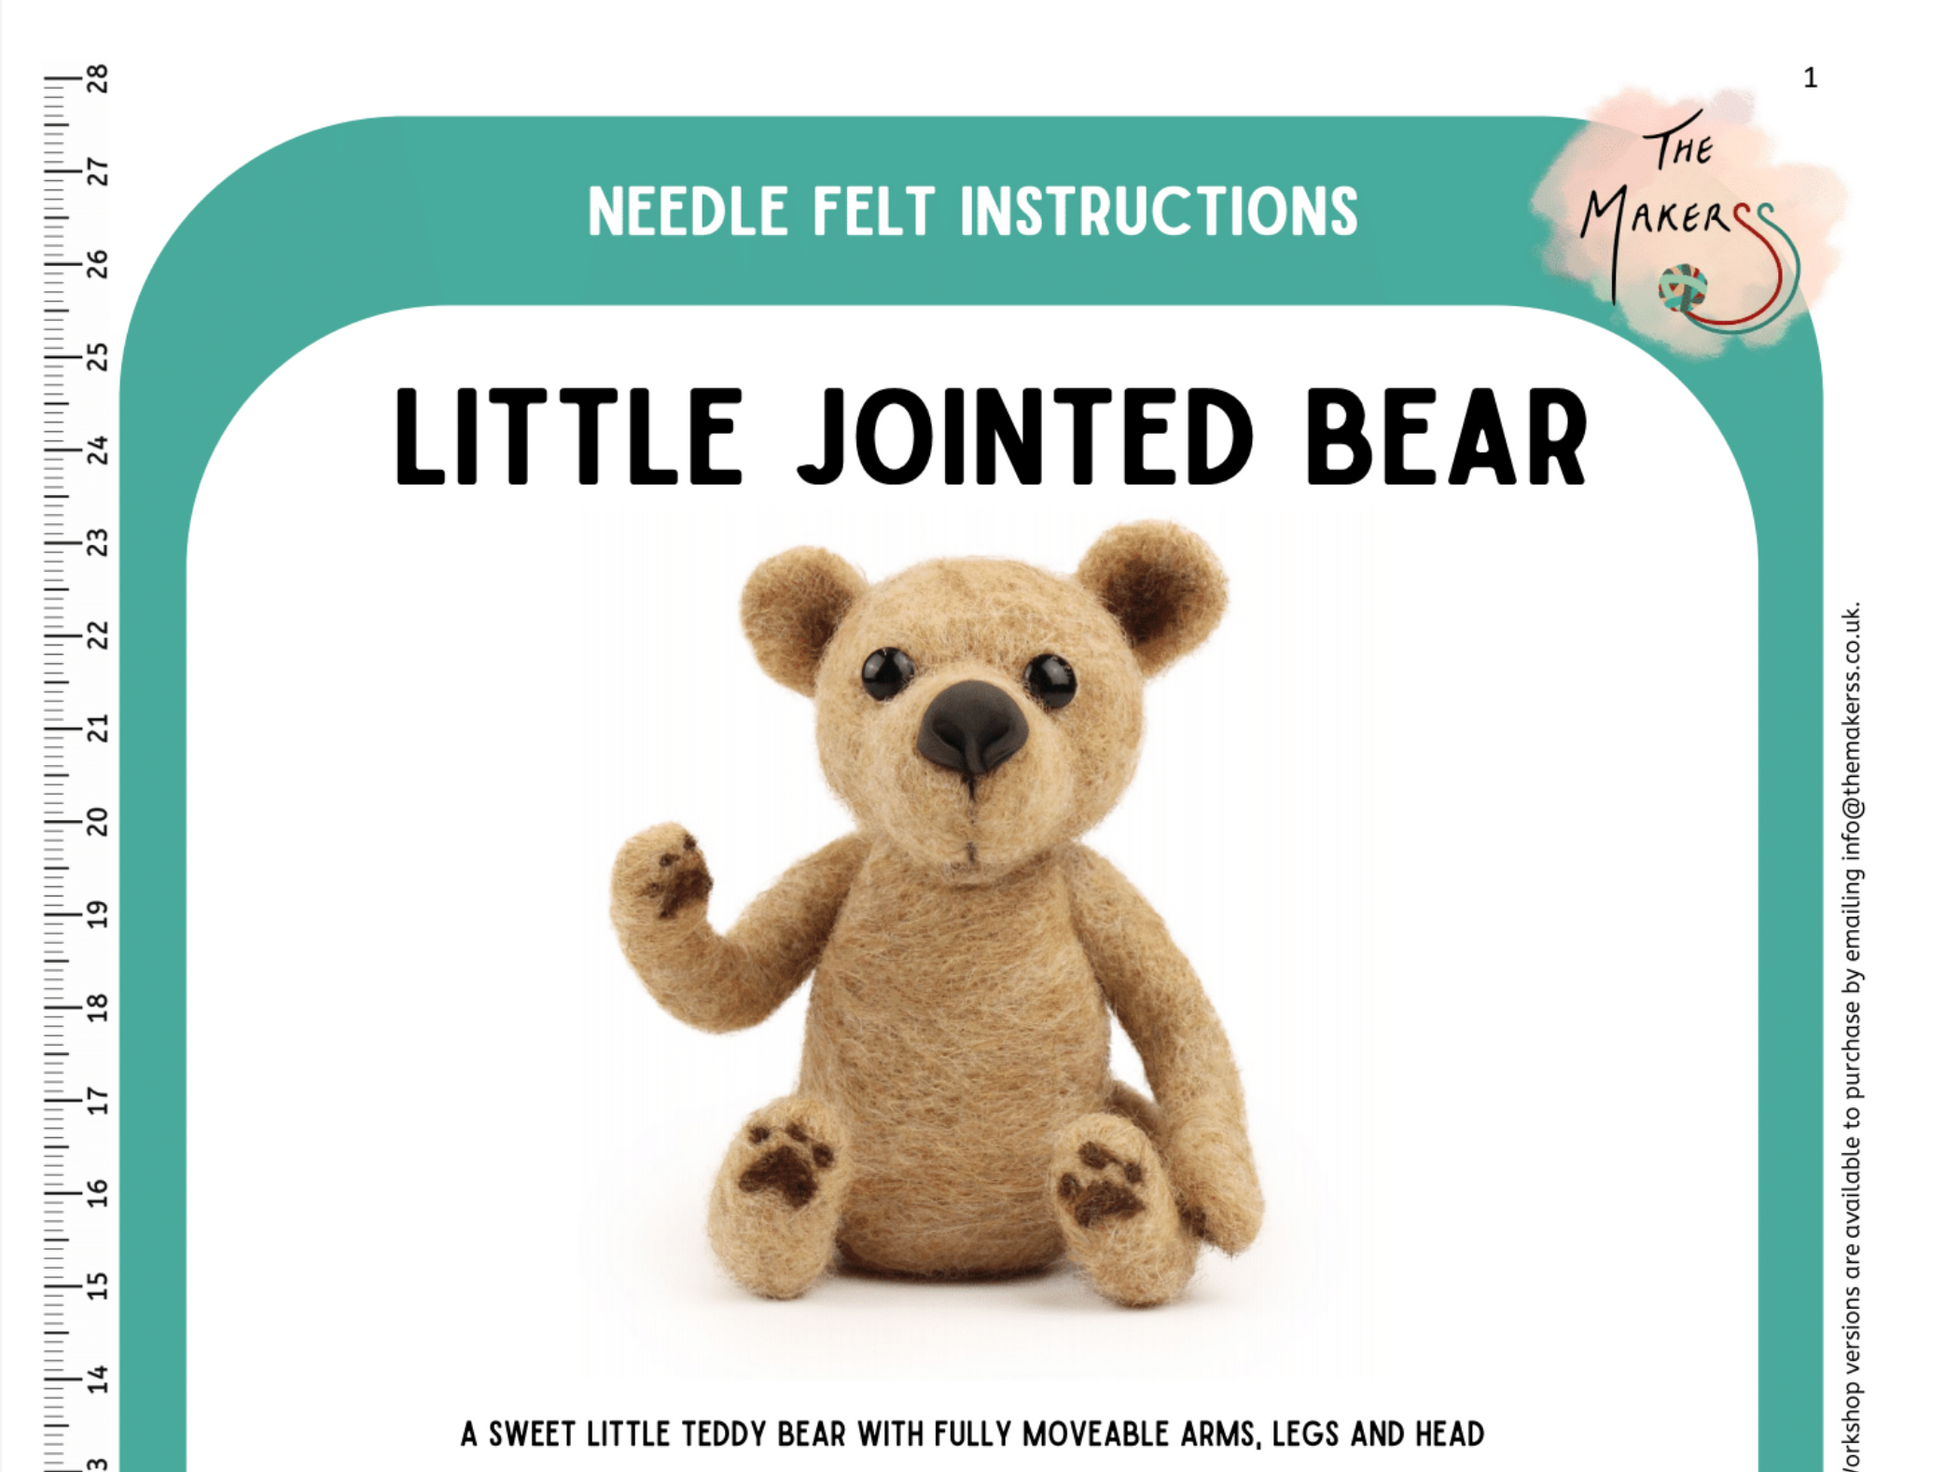 Little Jointed Vintage Bear Instructions PDF - The Makerss